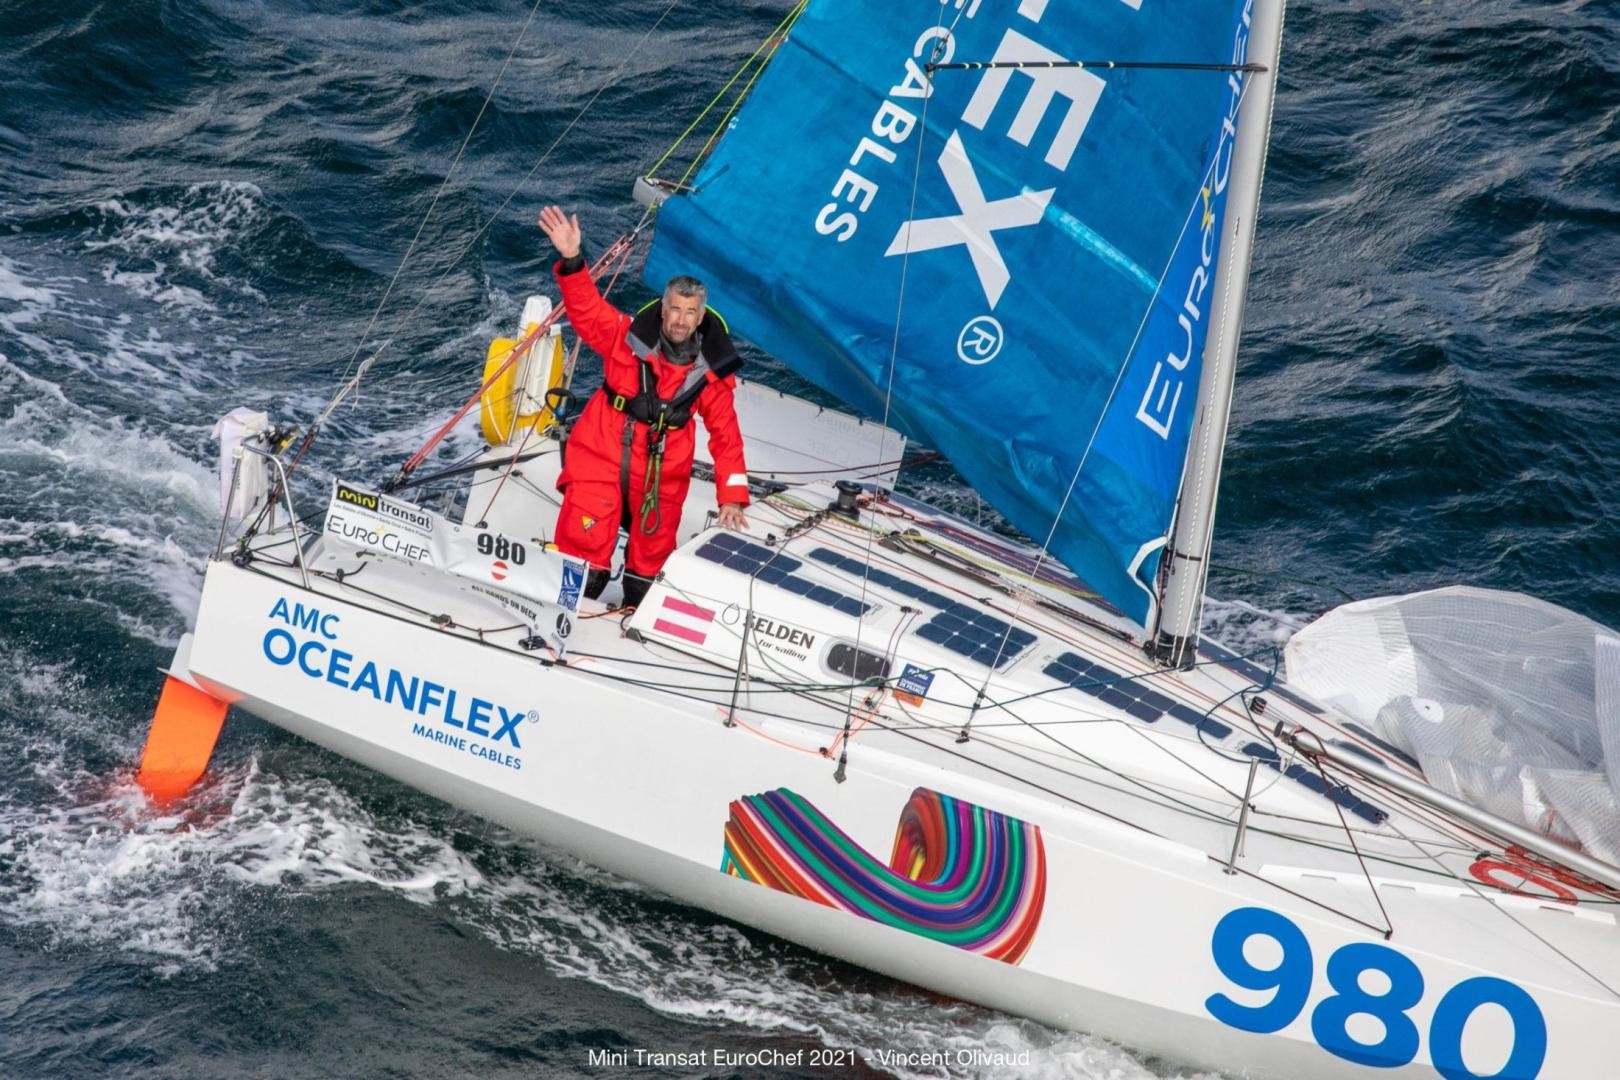 Mini Transat, Melwin Fink is the fastest in the production boats